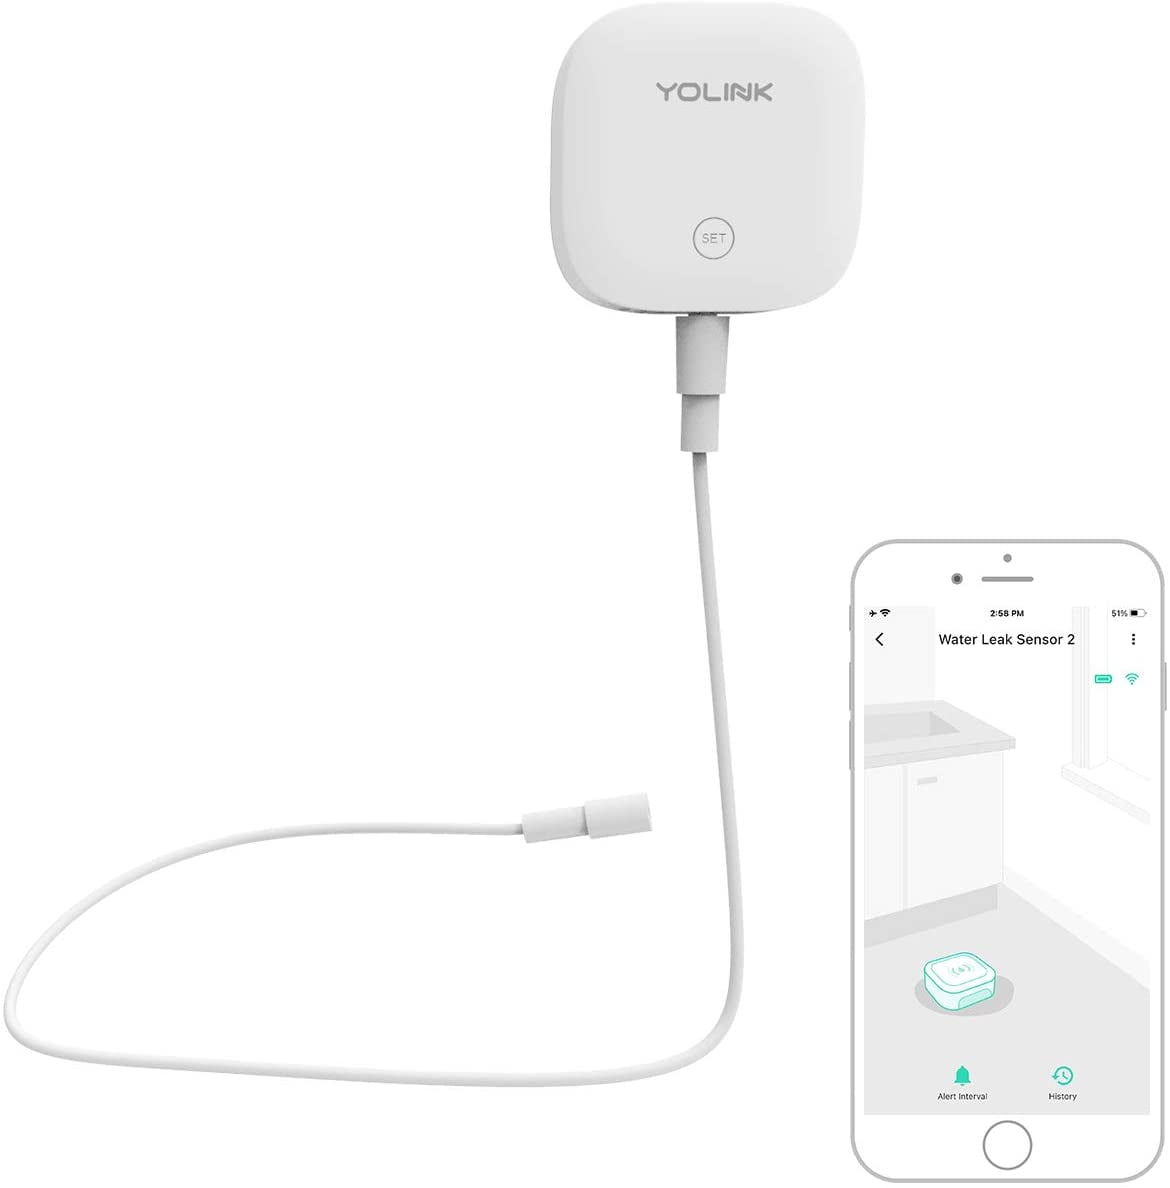 YoLink Water Leak Sensor 2, 1/4 Mile World's Longest Range Smart Home Water Leak Sensor, Water Leak Detector with Built-in Siren Up to Works with Alexa and IFTTT - YoLink Hub